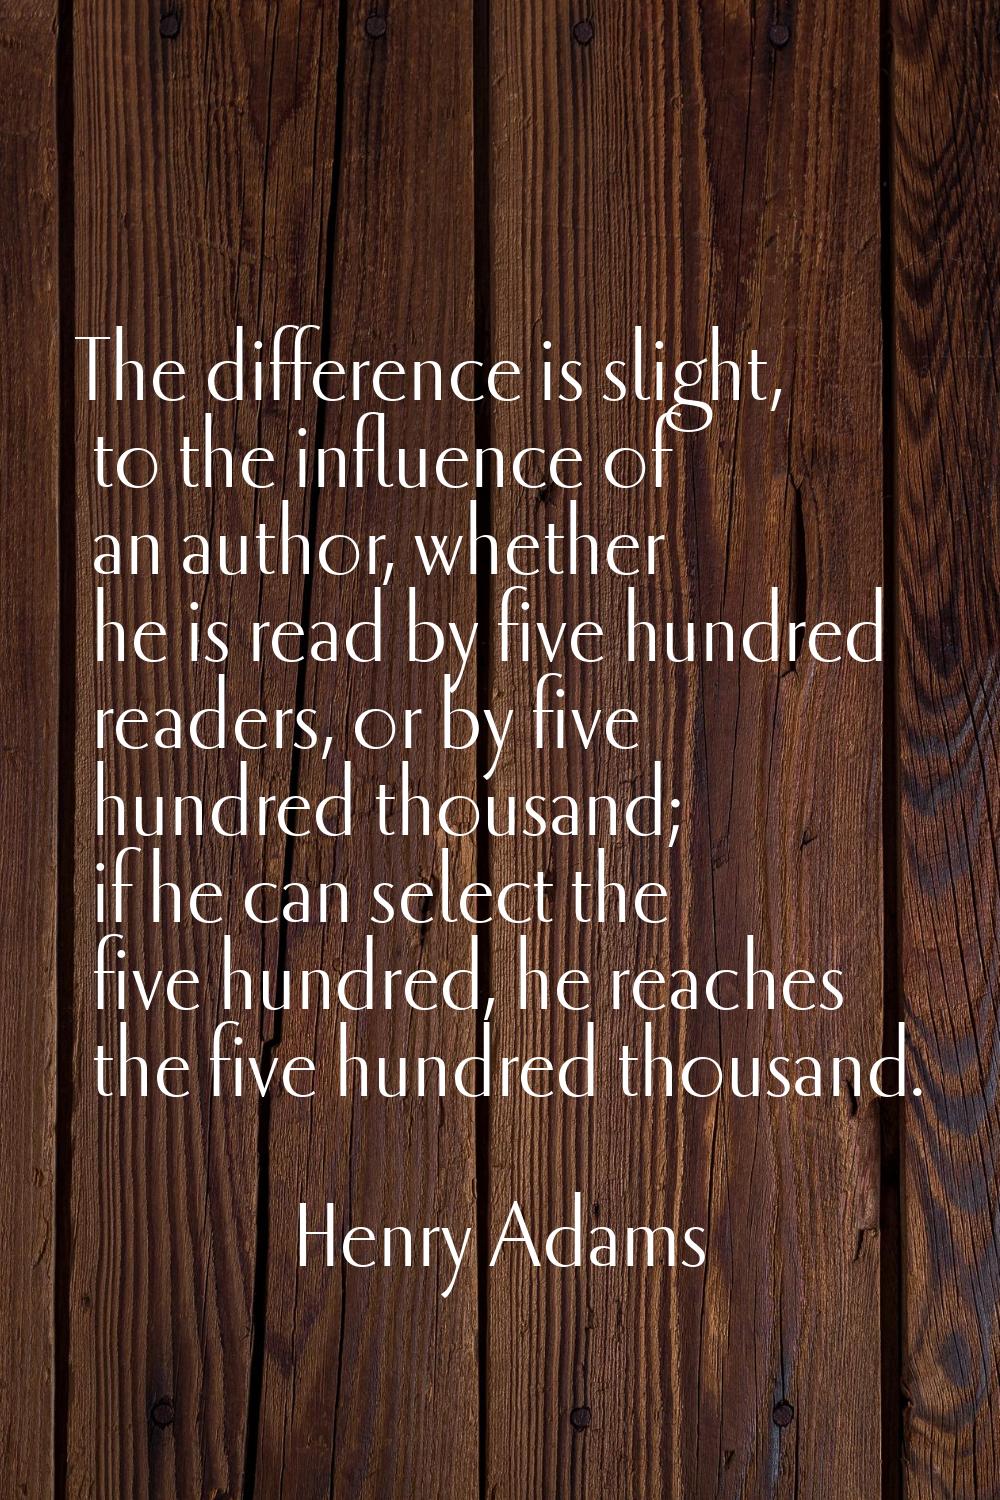 The difference is slight, to the influence of an author, whether he is read by five hundred readers